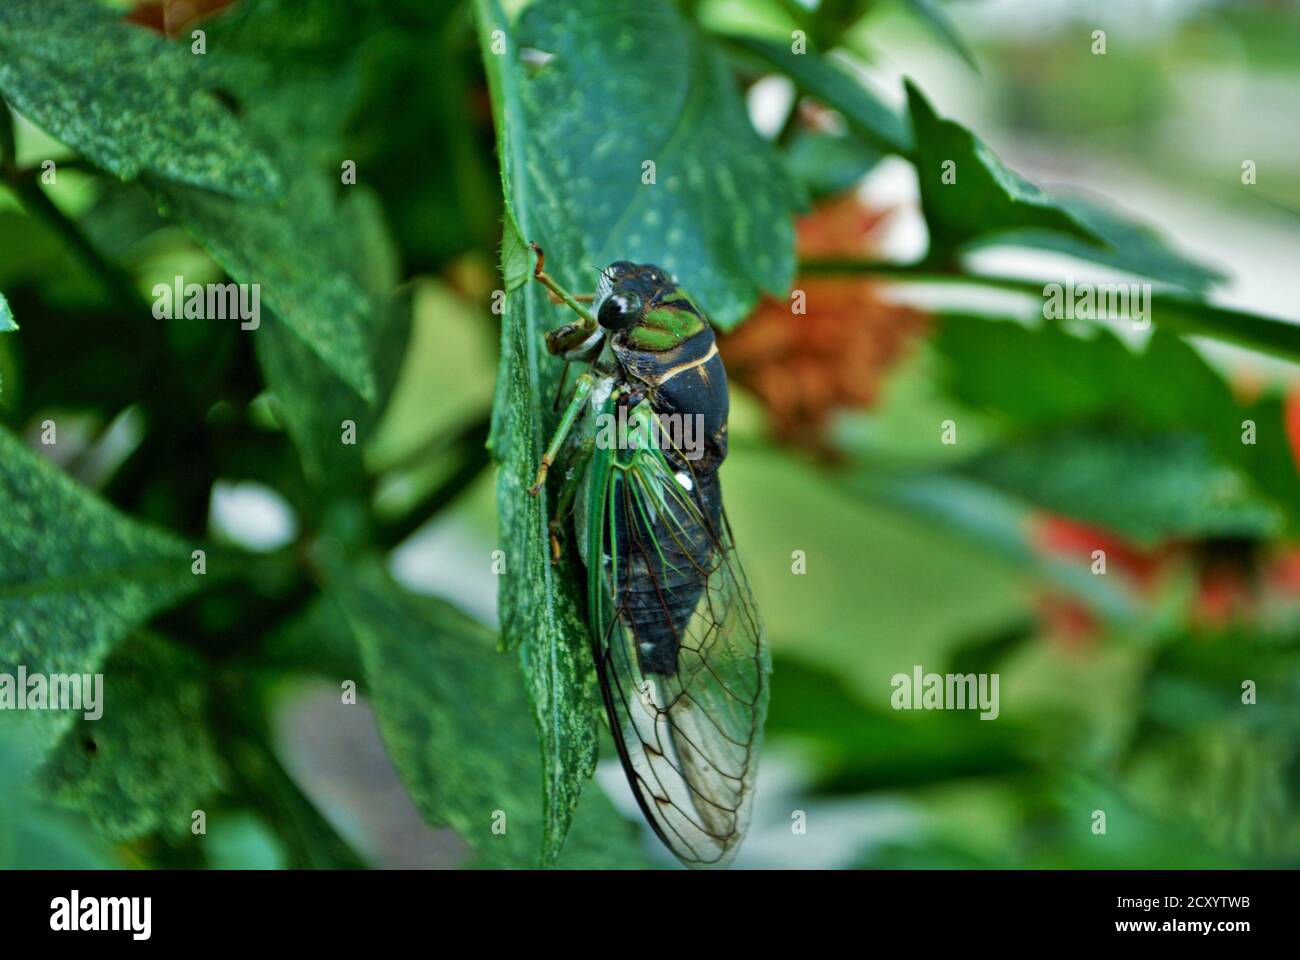 Close up of a green cicada insect bug on a plant Stock Photo